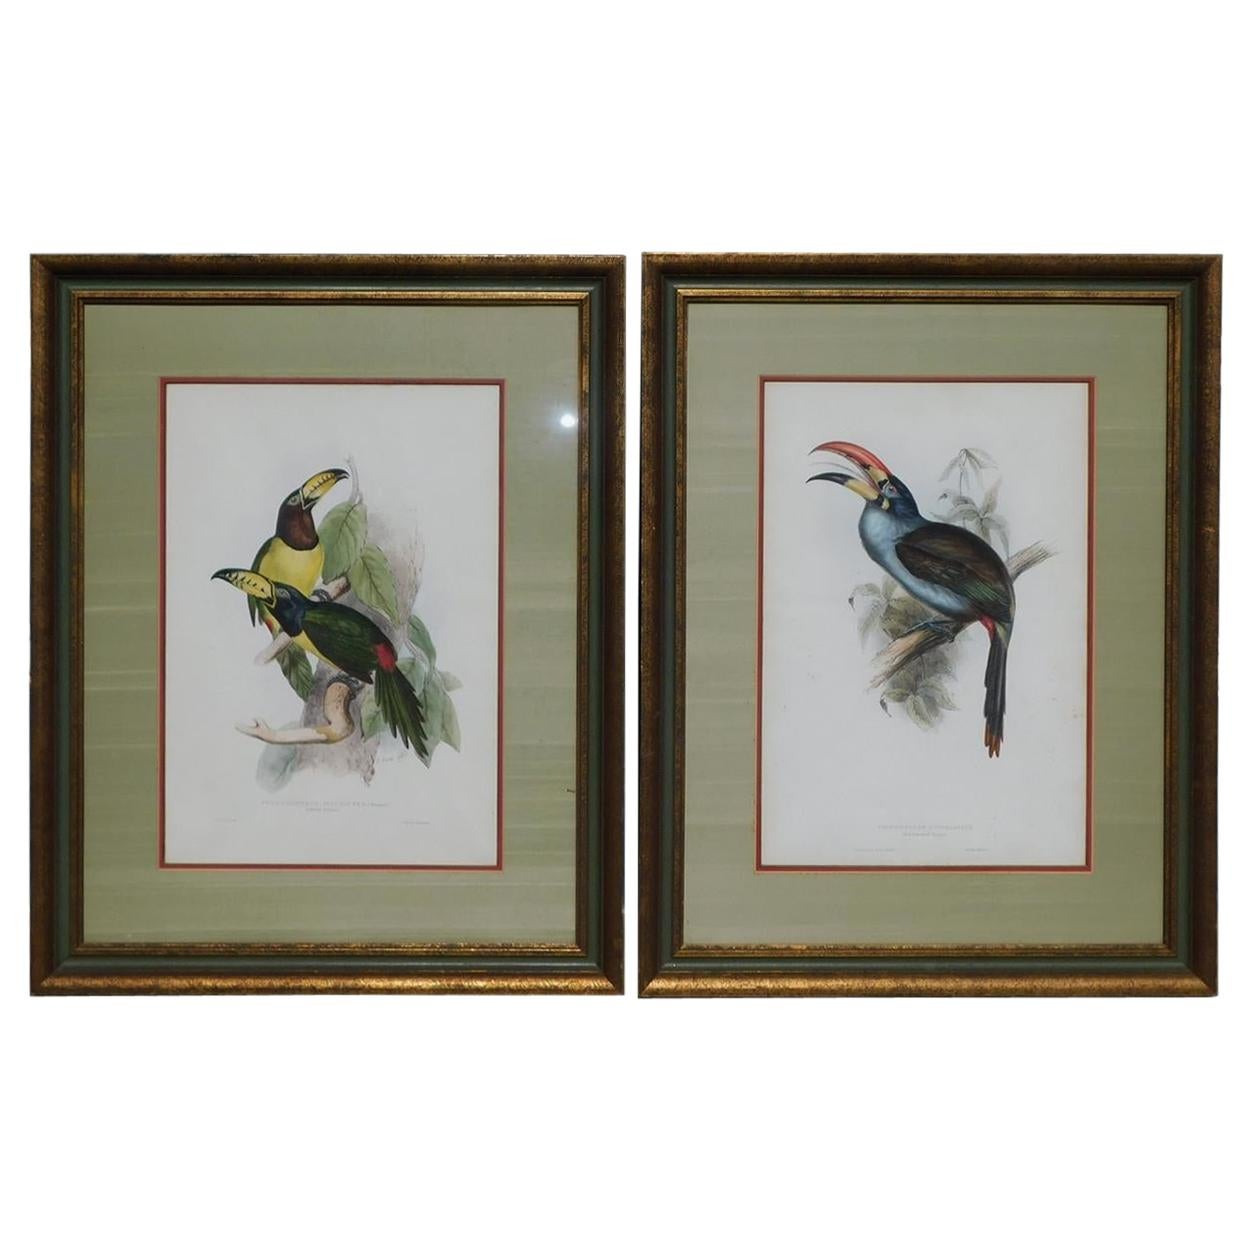 Pair of John Gould Hand Colored Framed Lithographs Family of Toucans, Circa 1840